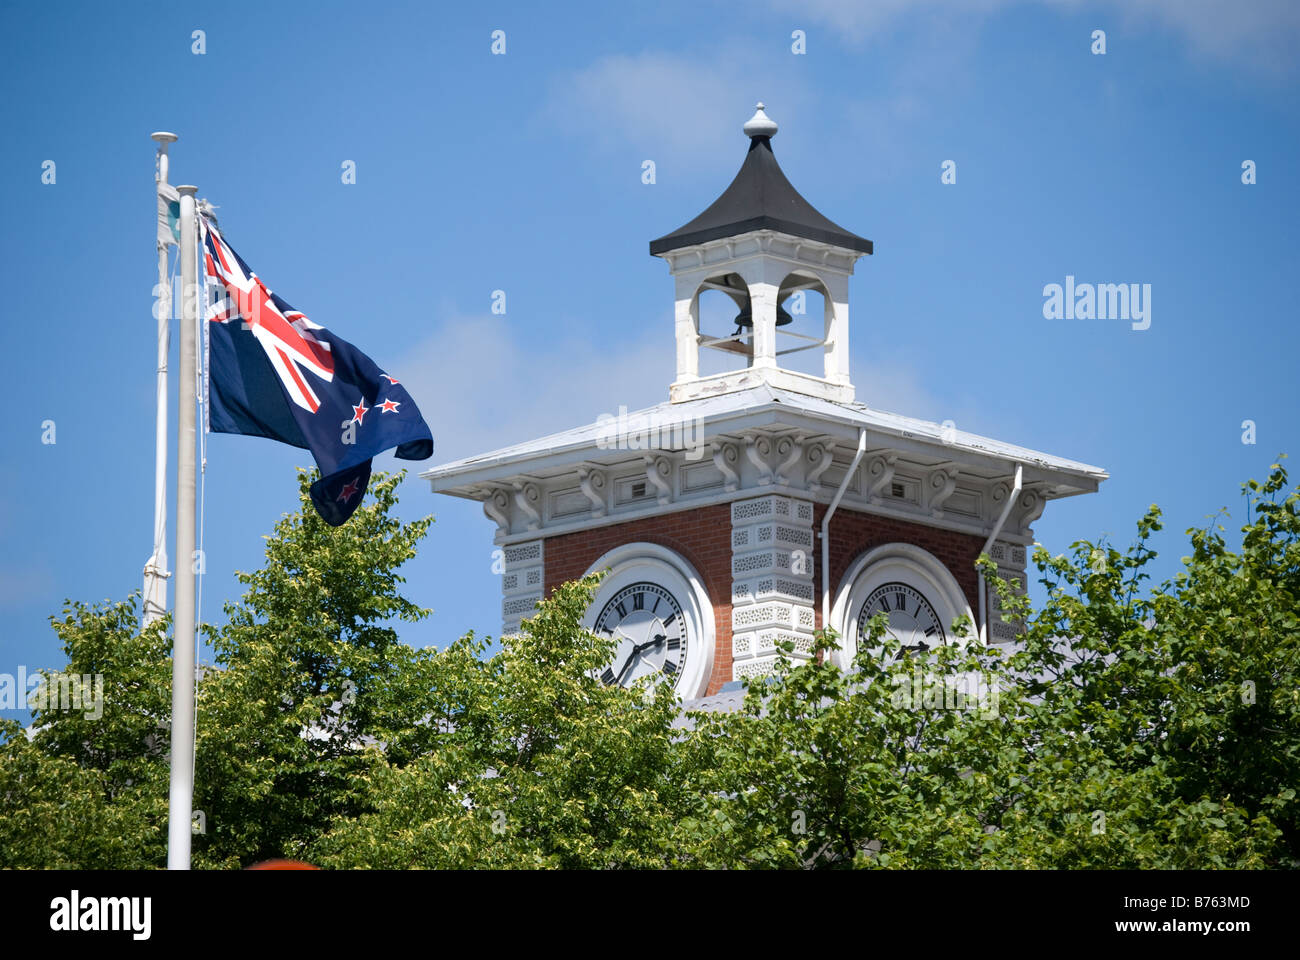 New Zealand flag and Old Post Office clock tower, Cathedral Square, Christchurch, Canterbury, New Zealand Stock Photo